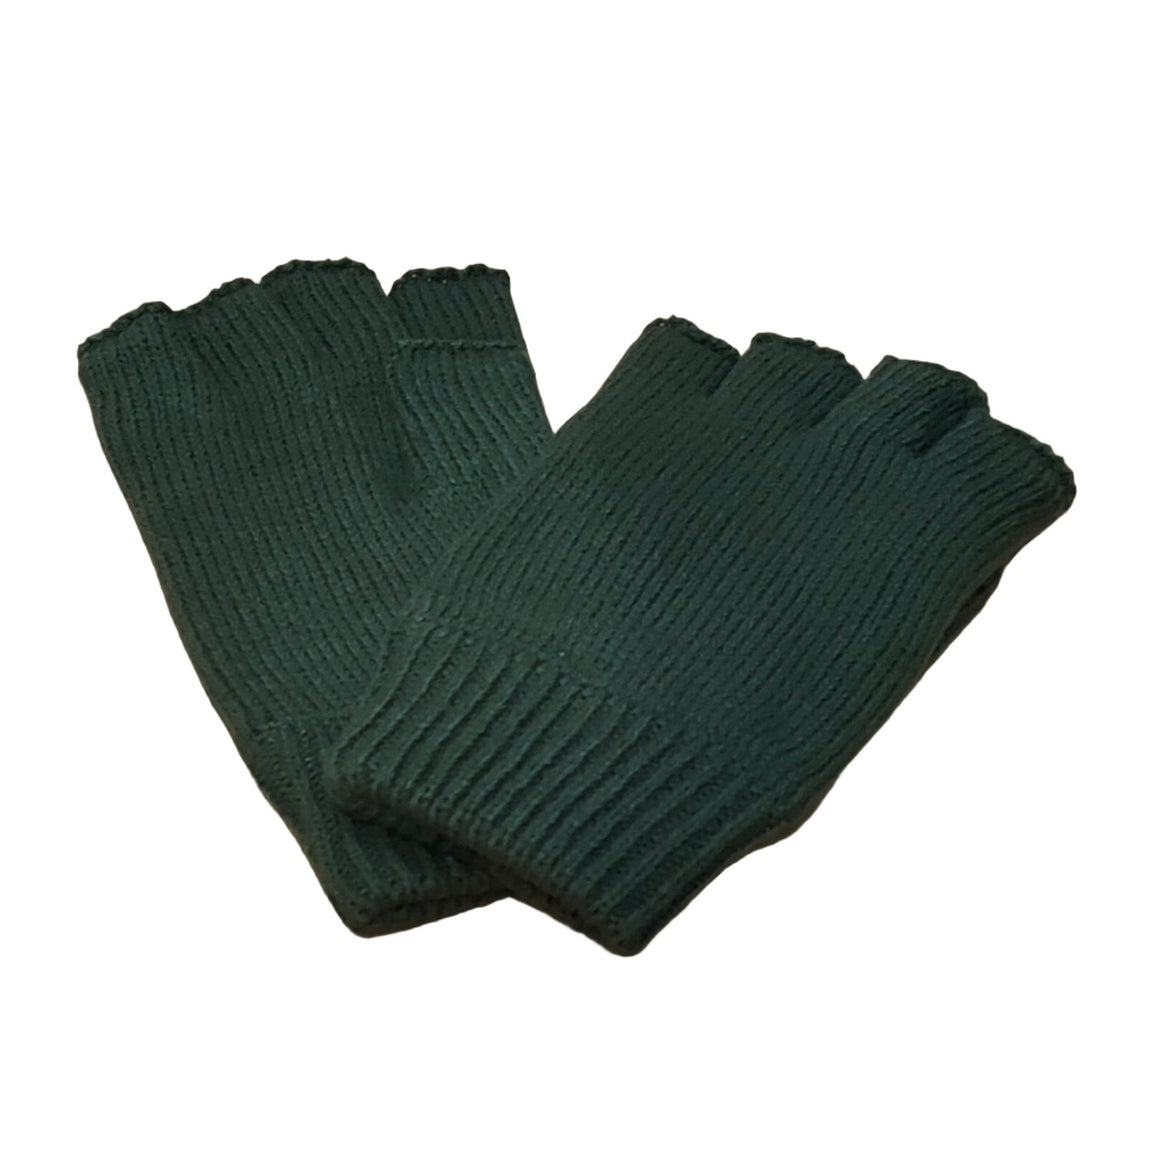 Avenel Acrylic Fingerless Glove With Thinsulate Lining - Olive